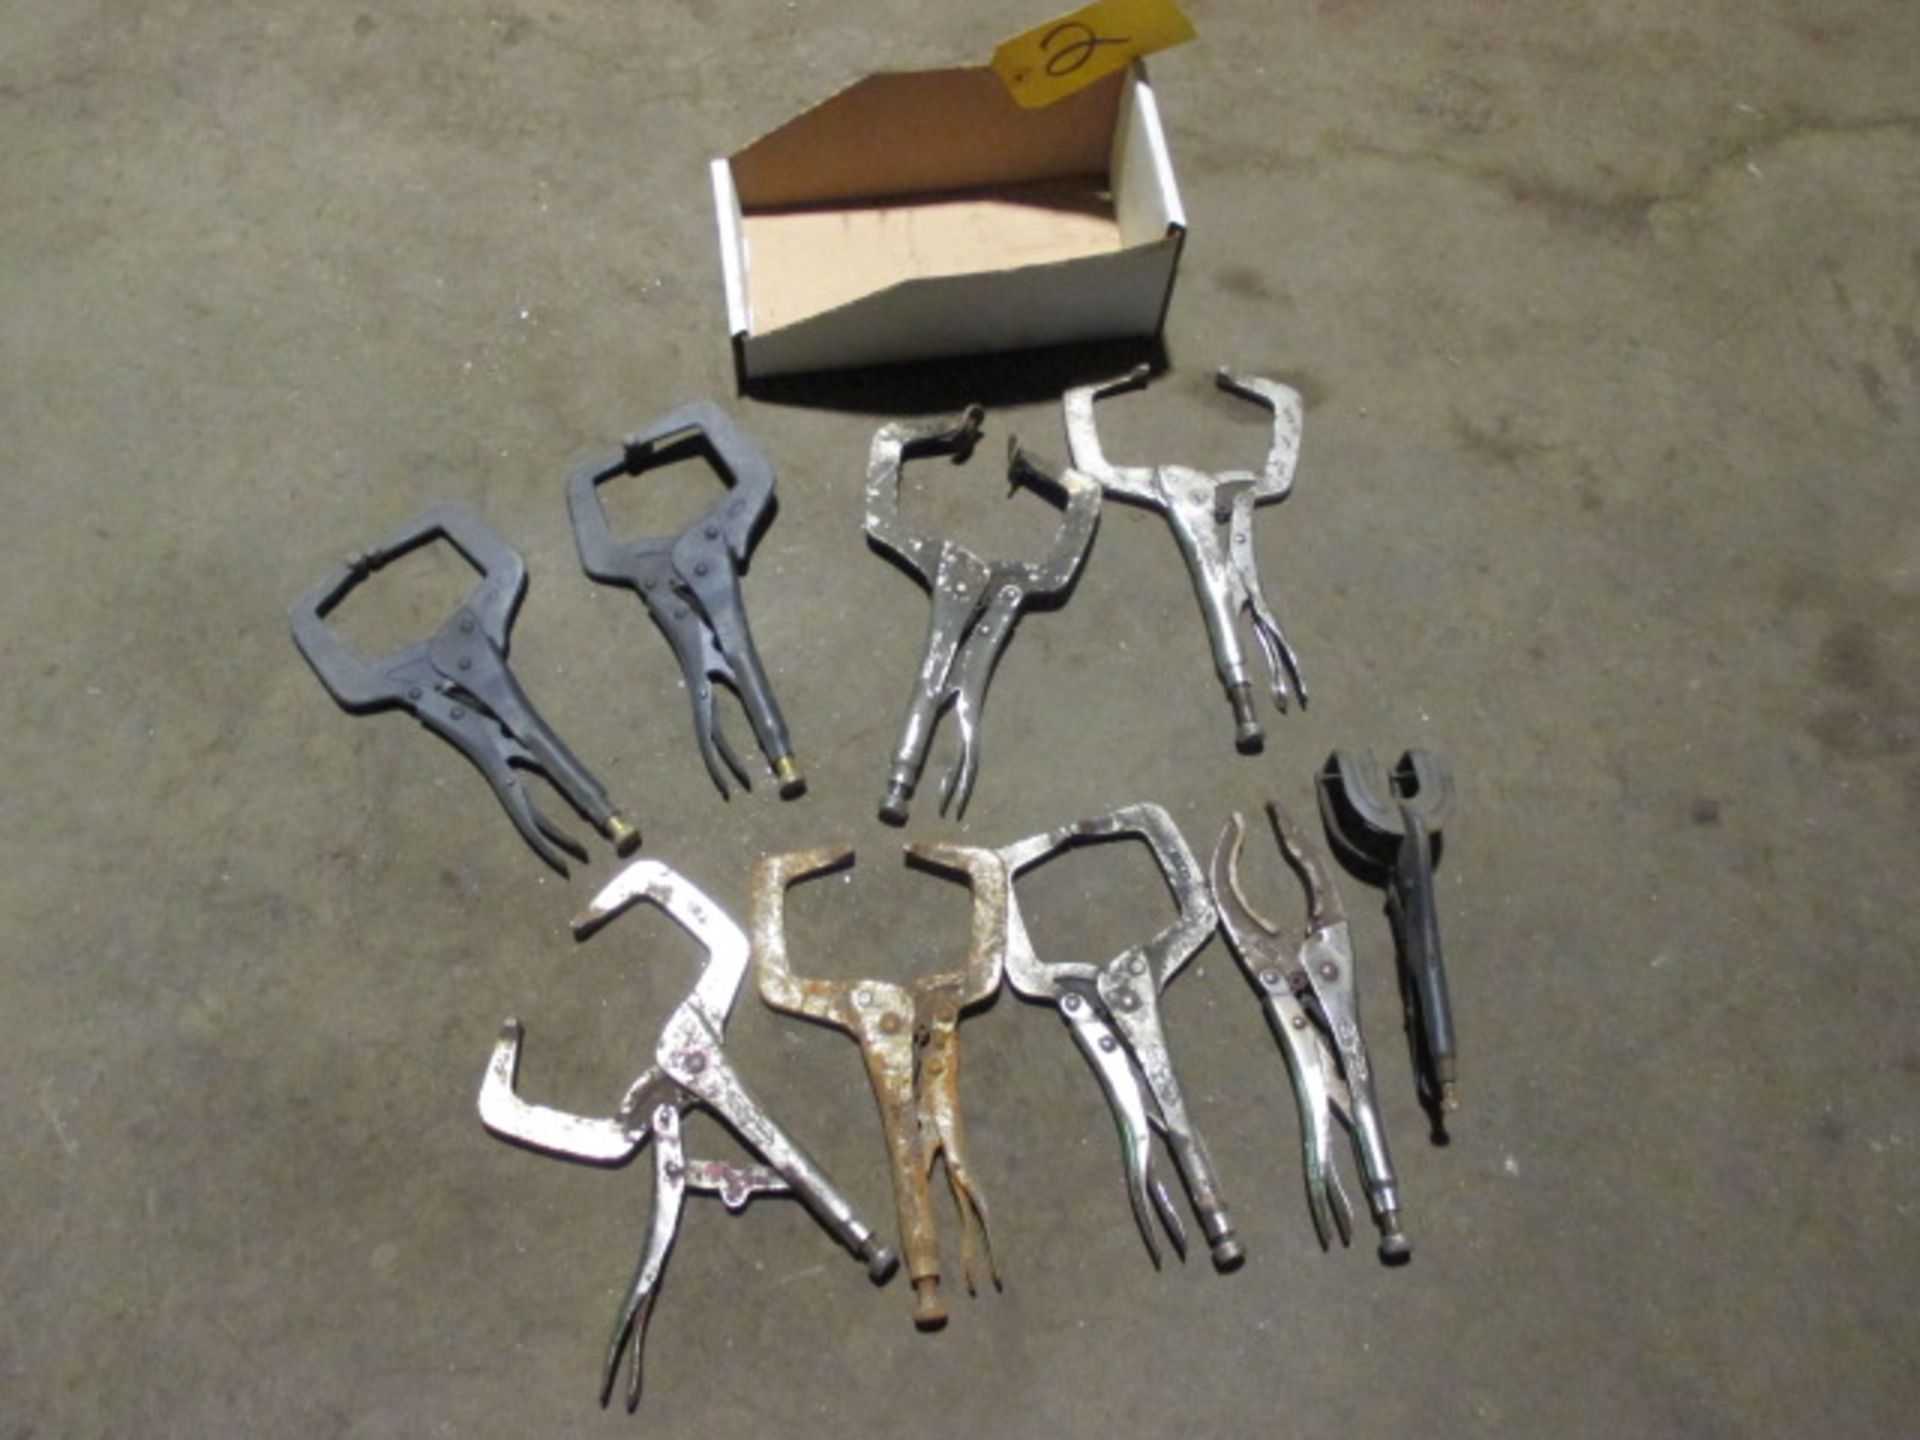 Approximately (9) vise grips.